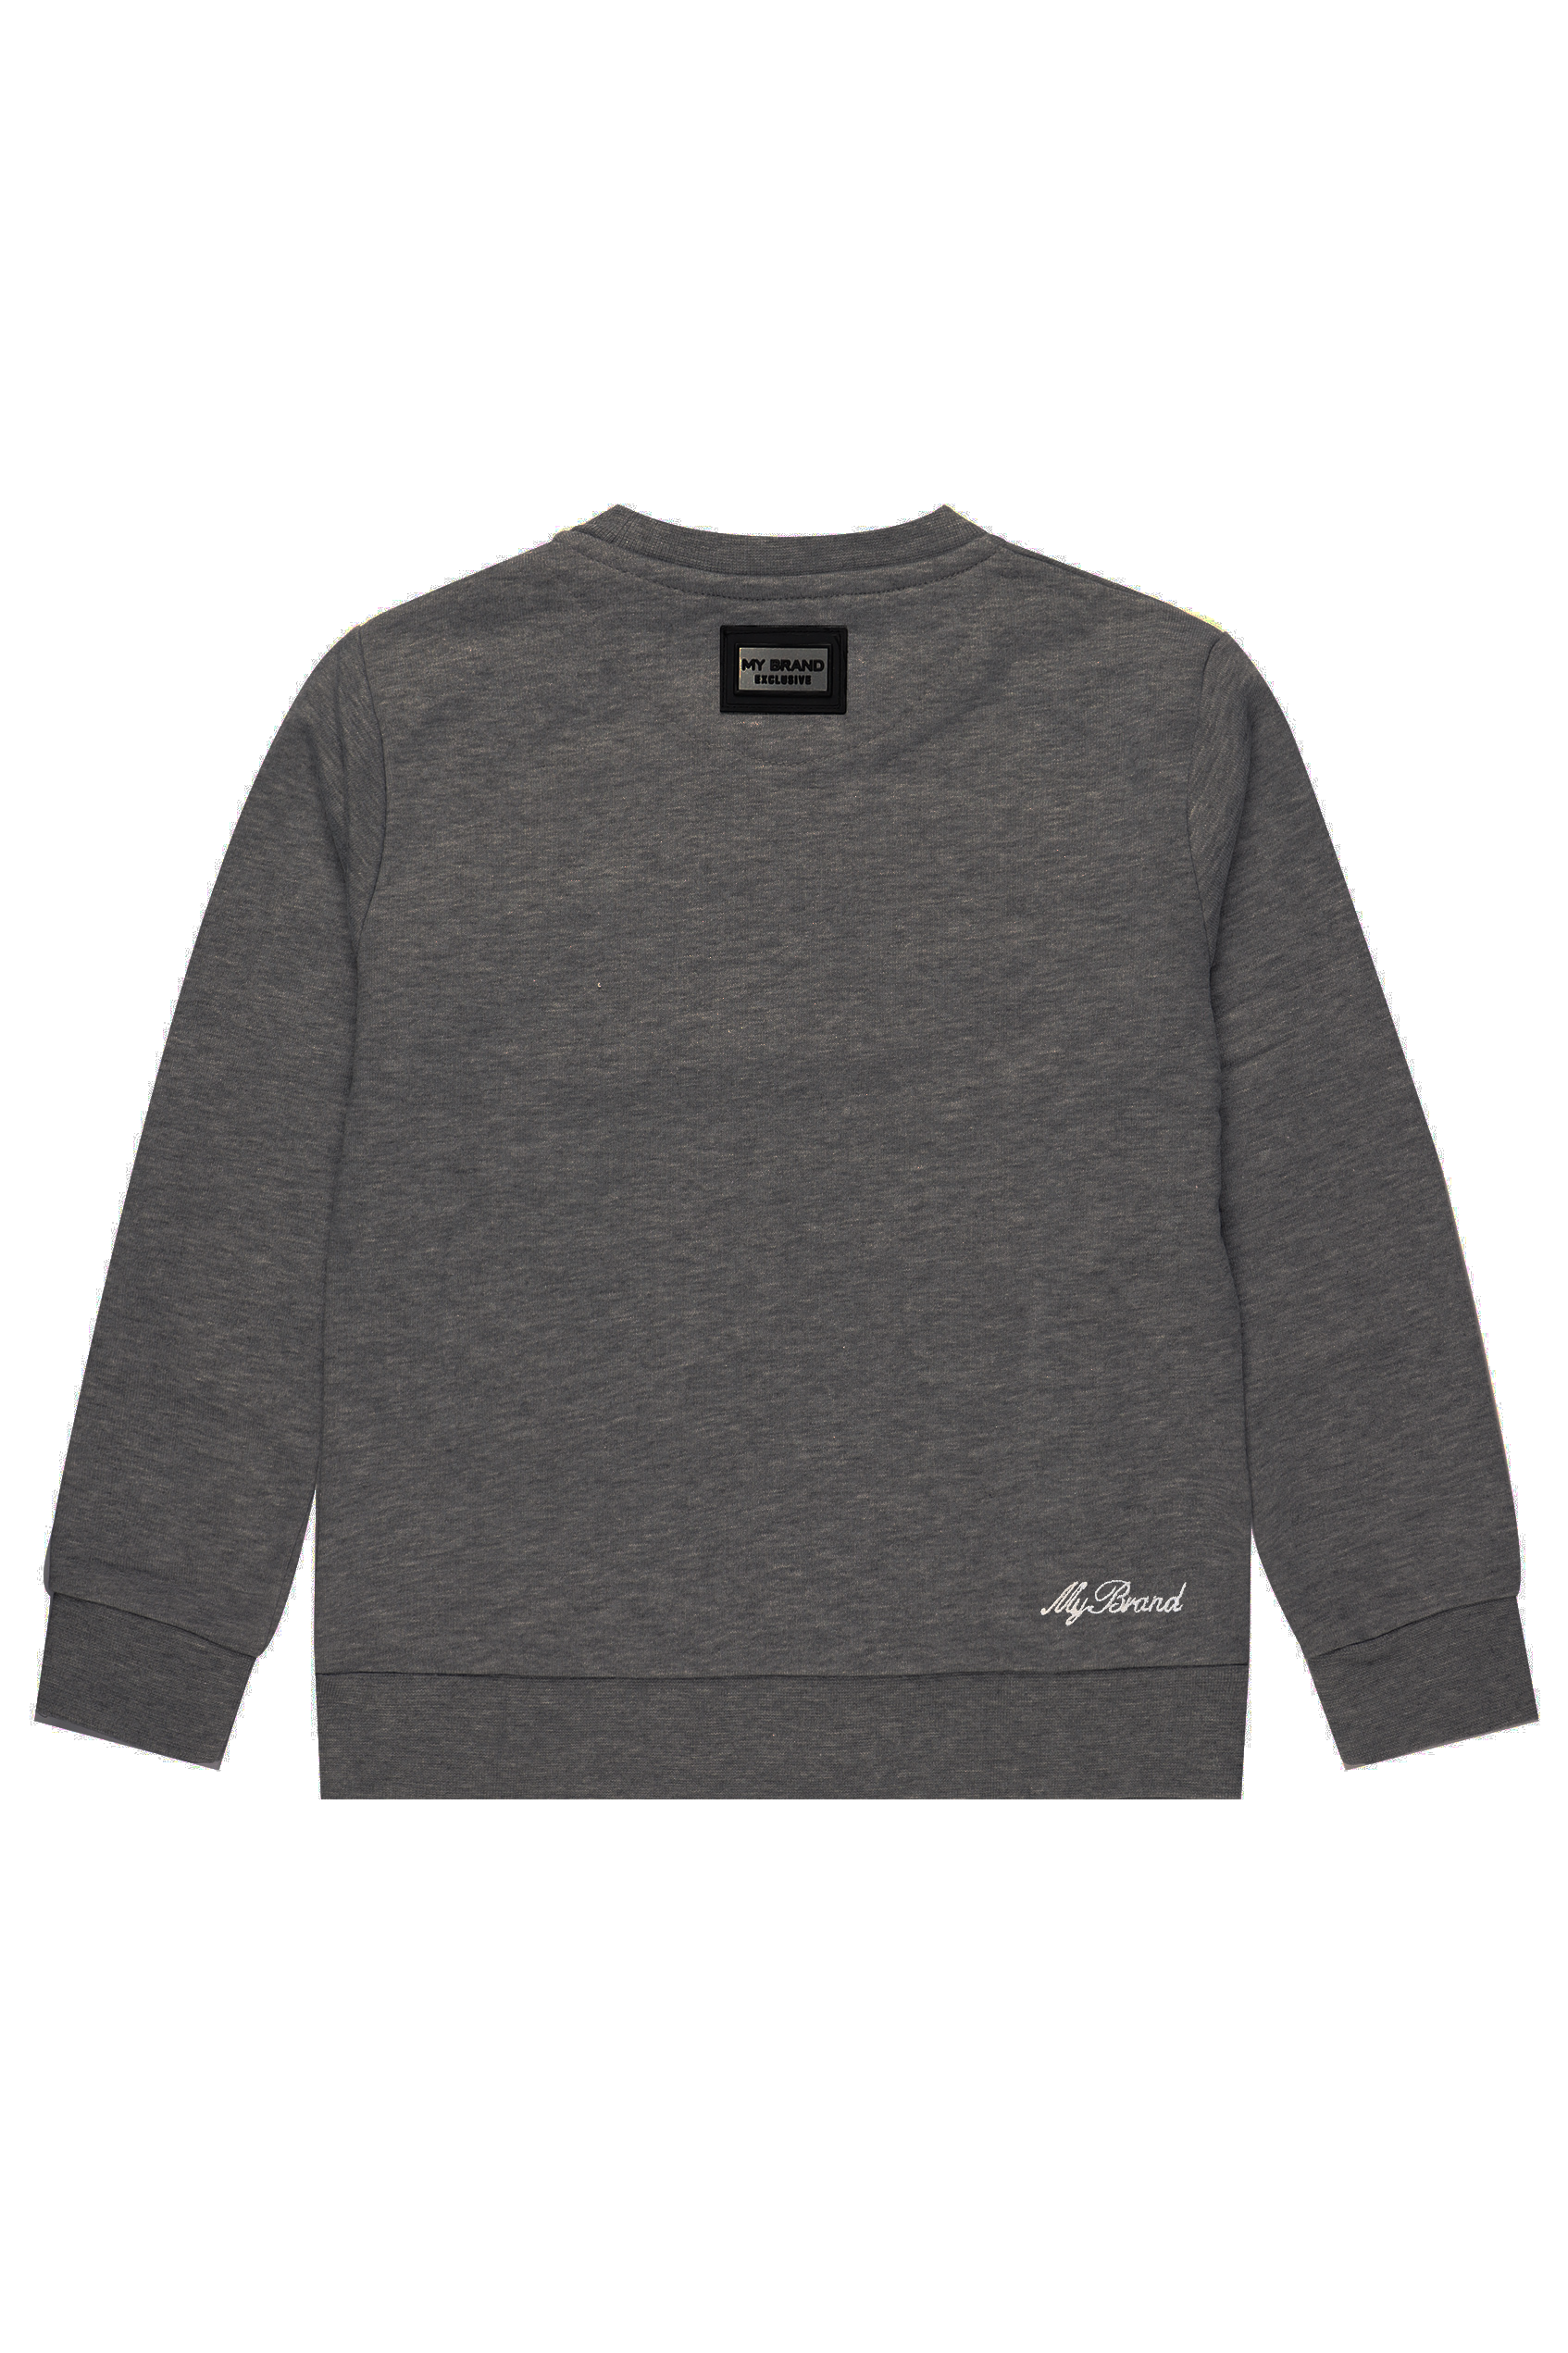 Takers Risk Cards Sweater Grey